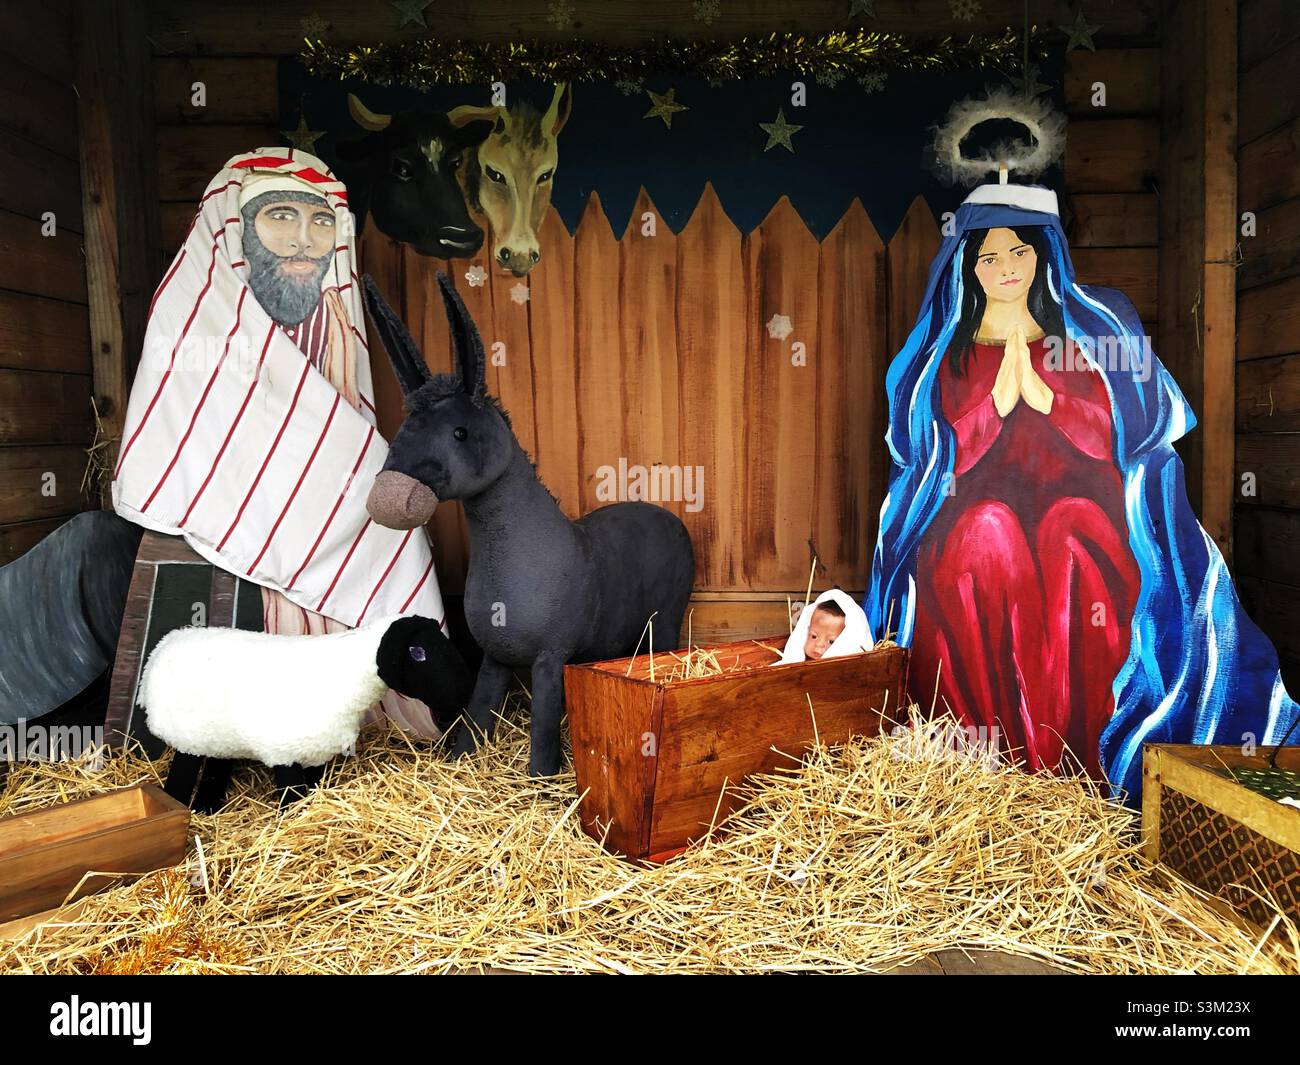 A school Christmas nativity play scene with Mary Joseph and baby Jesus in a manger surrounded by farm animals including a donkey and sheep Stock Photo